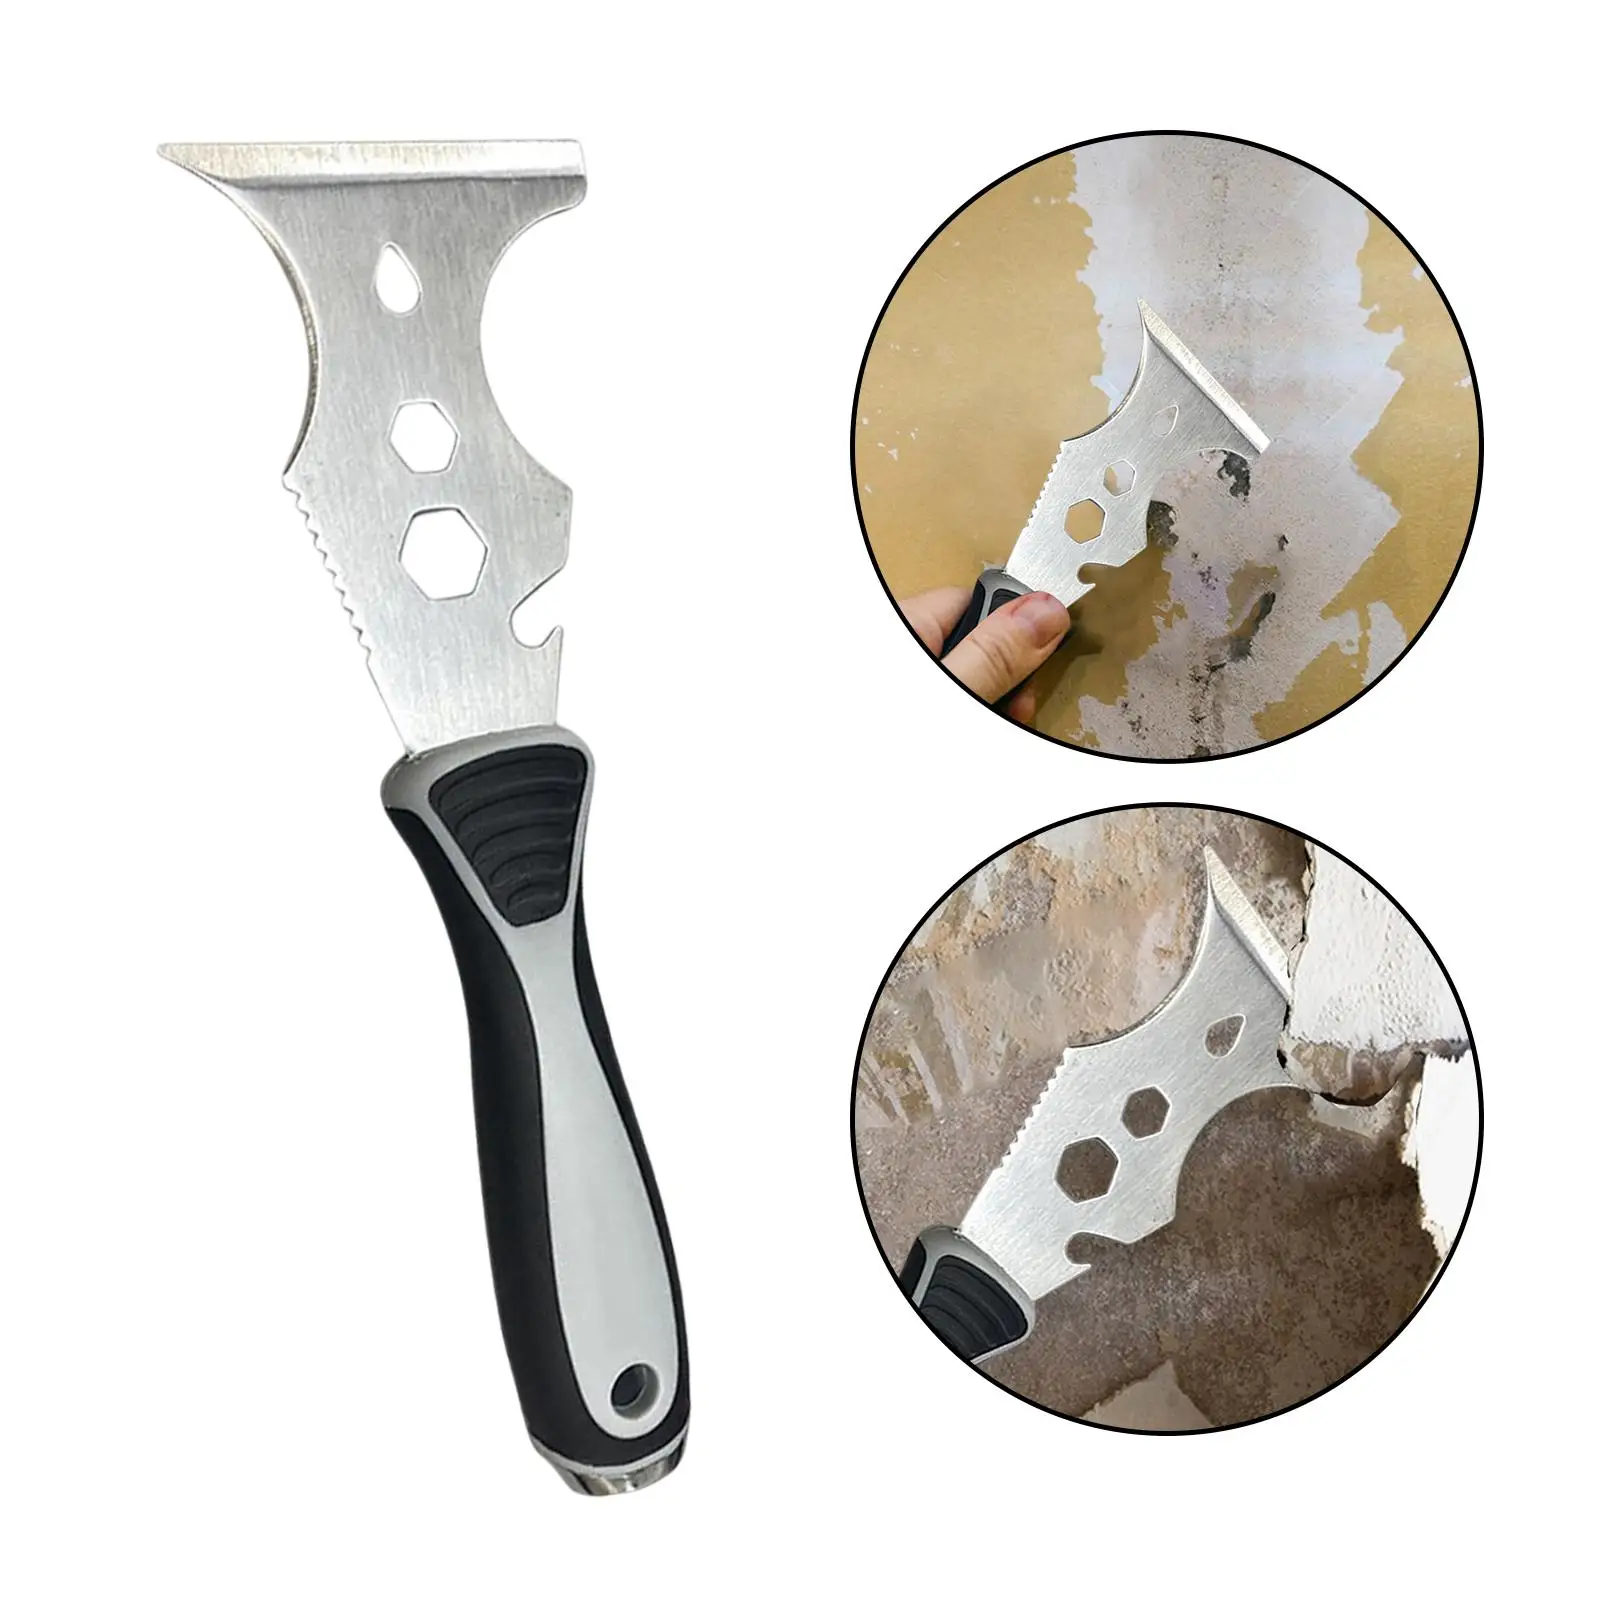 Multi Use Paint Scraper Painting Tools Glue Removing Tool Professional Putty Knife daily cleaning Home Decoration Repair